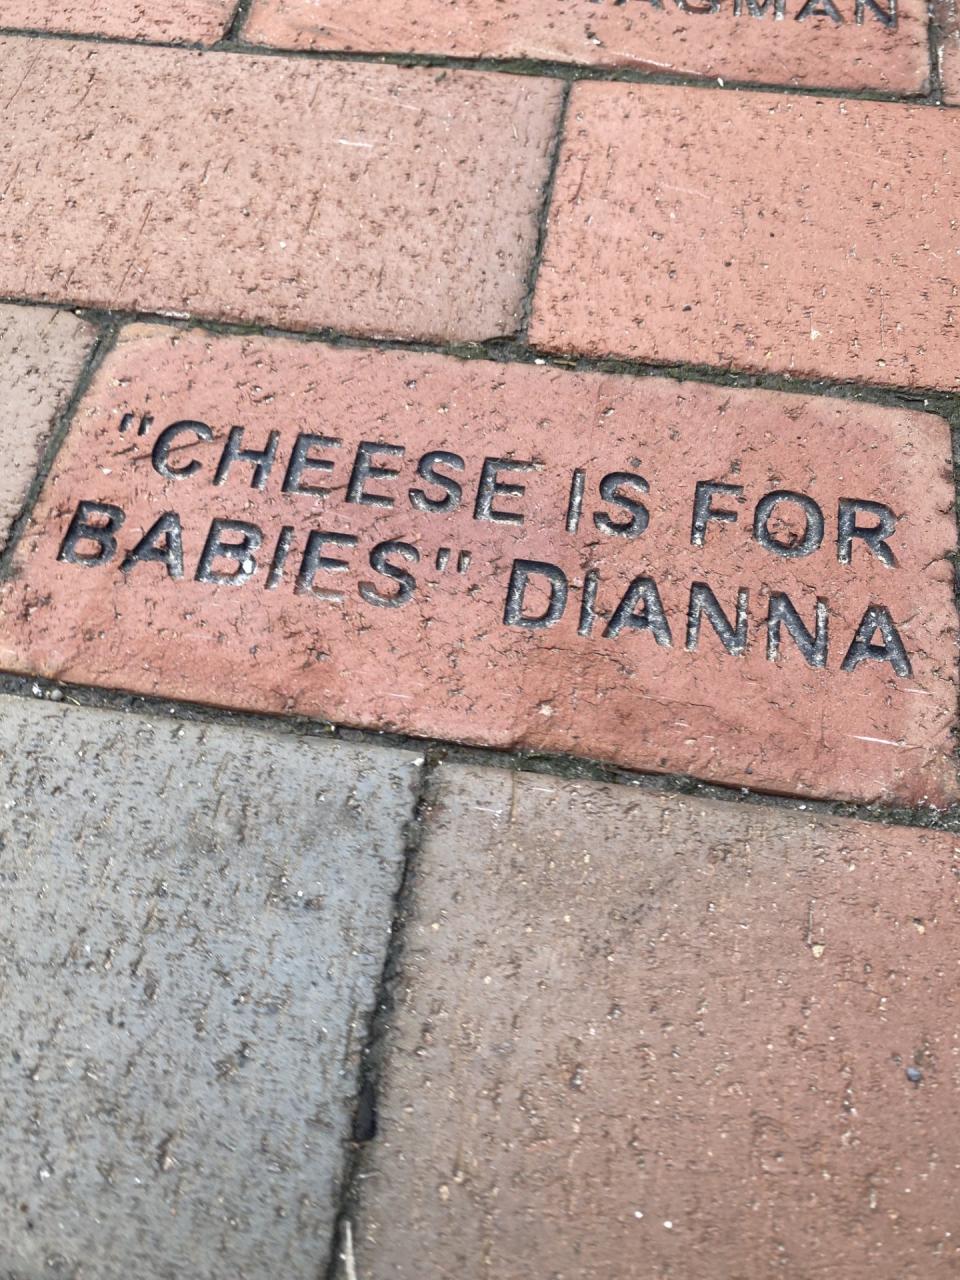 This brick inscribed with "Cheese is for babies. Dianna" was part of a 2011-2013 fundraiser for the Athenaeum Foundation in Indianapolis. The brick is near the YMCA entrance to the 401 E. Michigan St. landmark building.